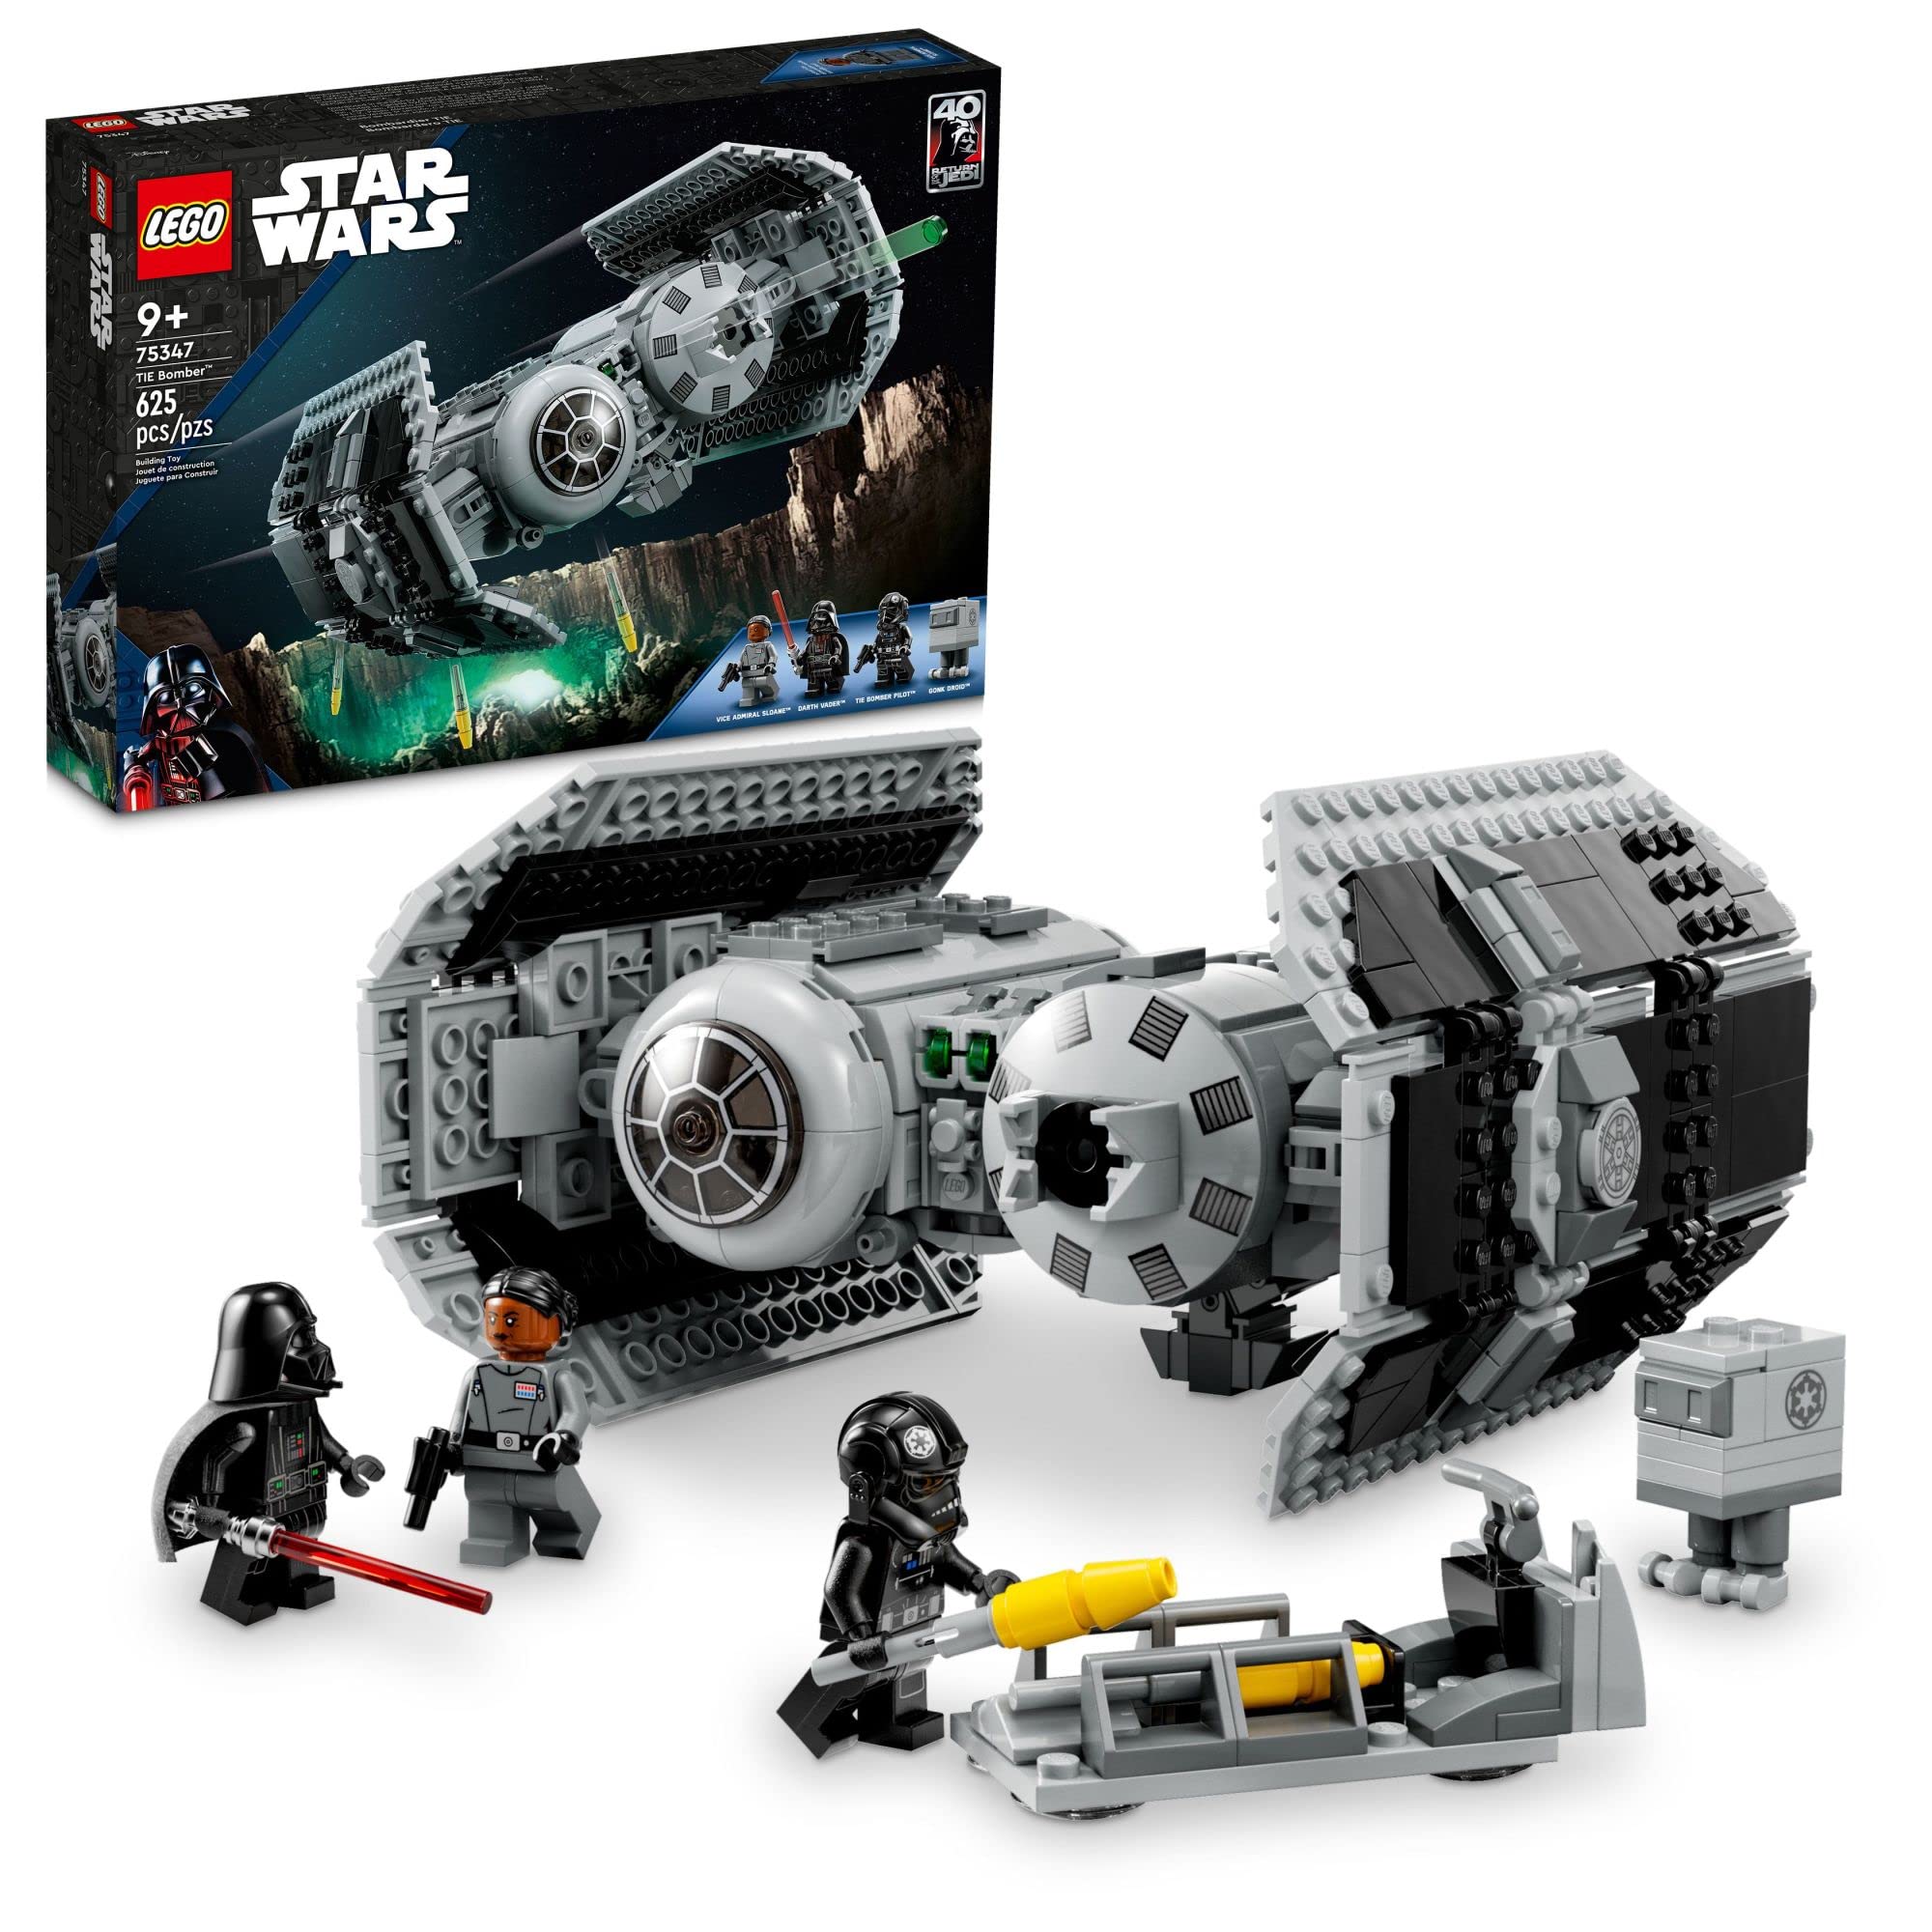 LEGO Star Wars TIE Bomber w/ 3 Mini Figures & Gonk Droid (75347) $52 + Free Shipping